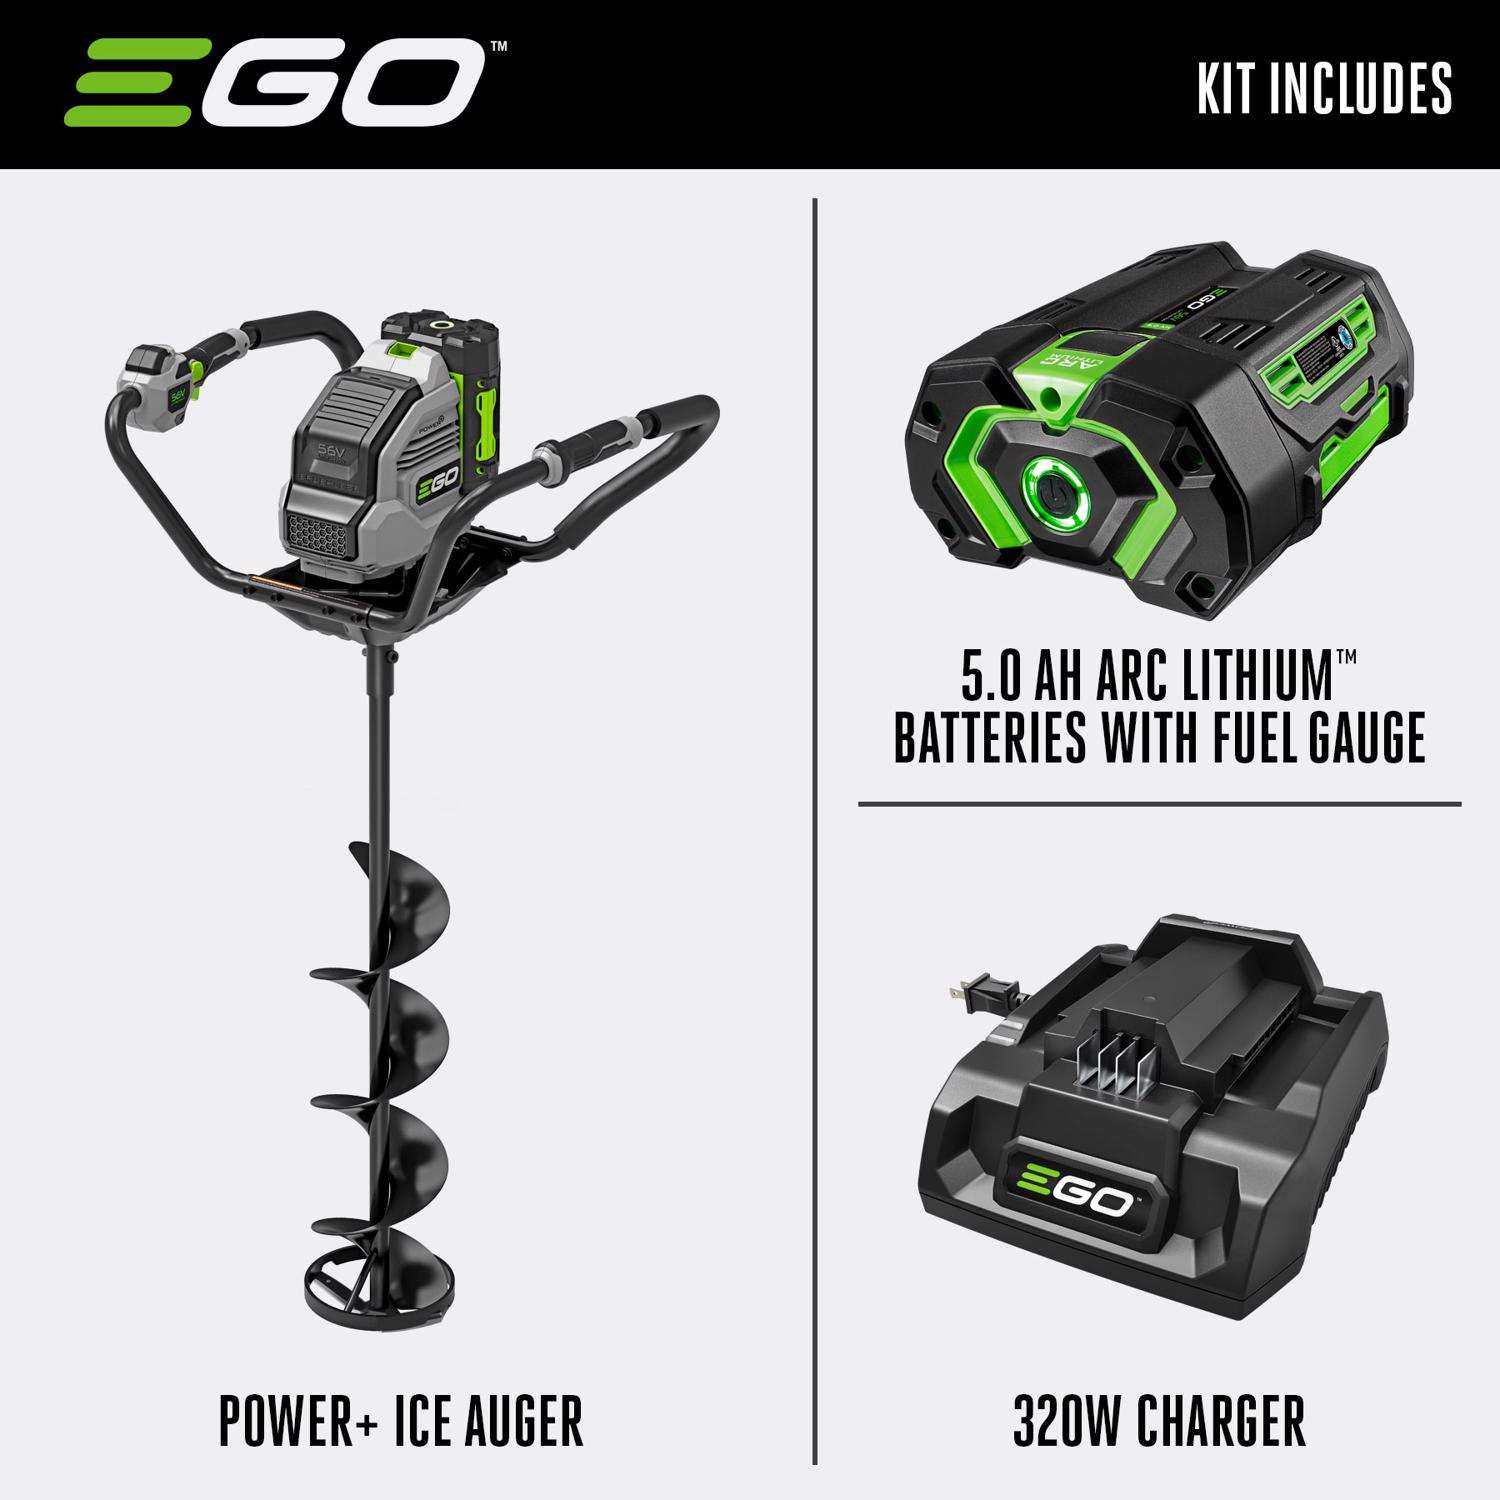 Ego IG0804 Cordless Ice Auger, Ice Drilling